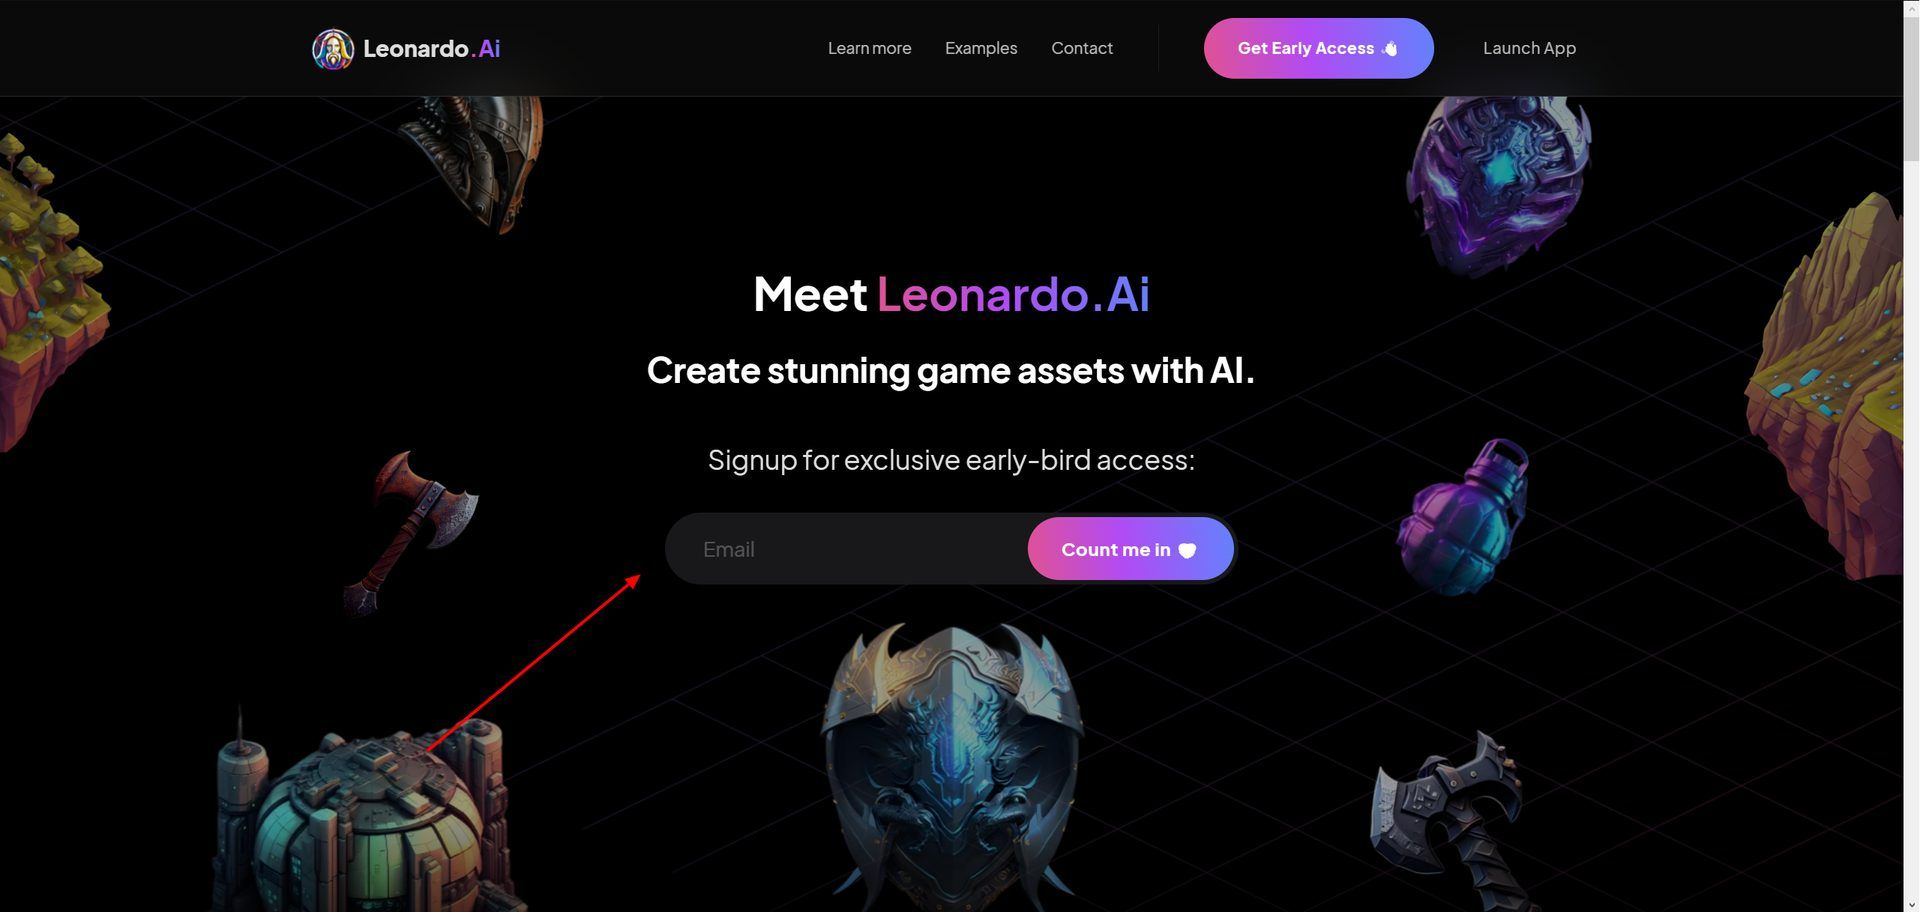 What Is Leonardo AI: Explore its features and learn how to get the Leonardo AI early access. Everything you should know about Leonardo AI is here!